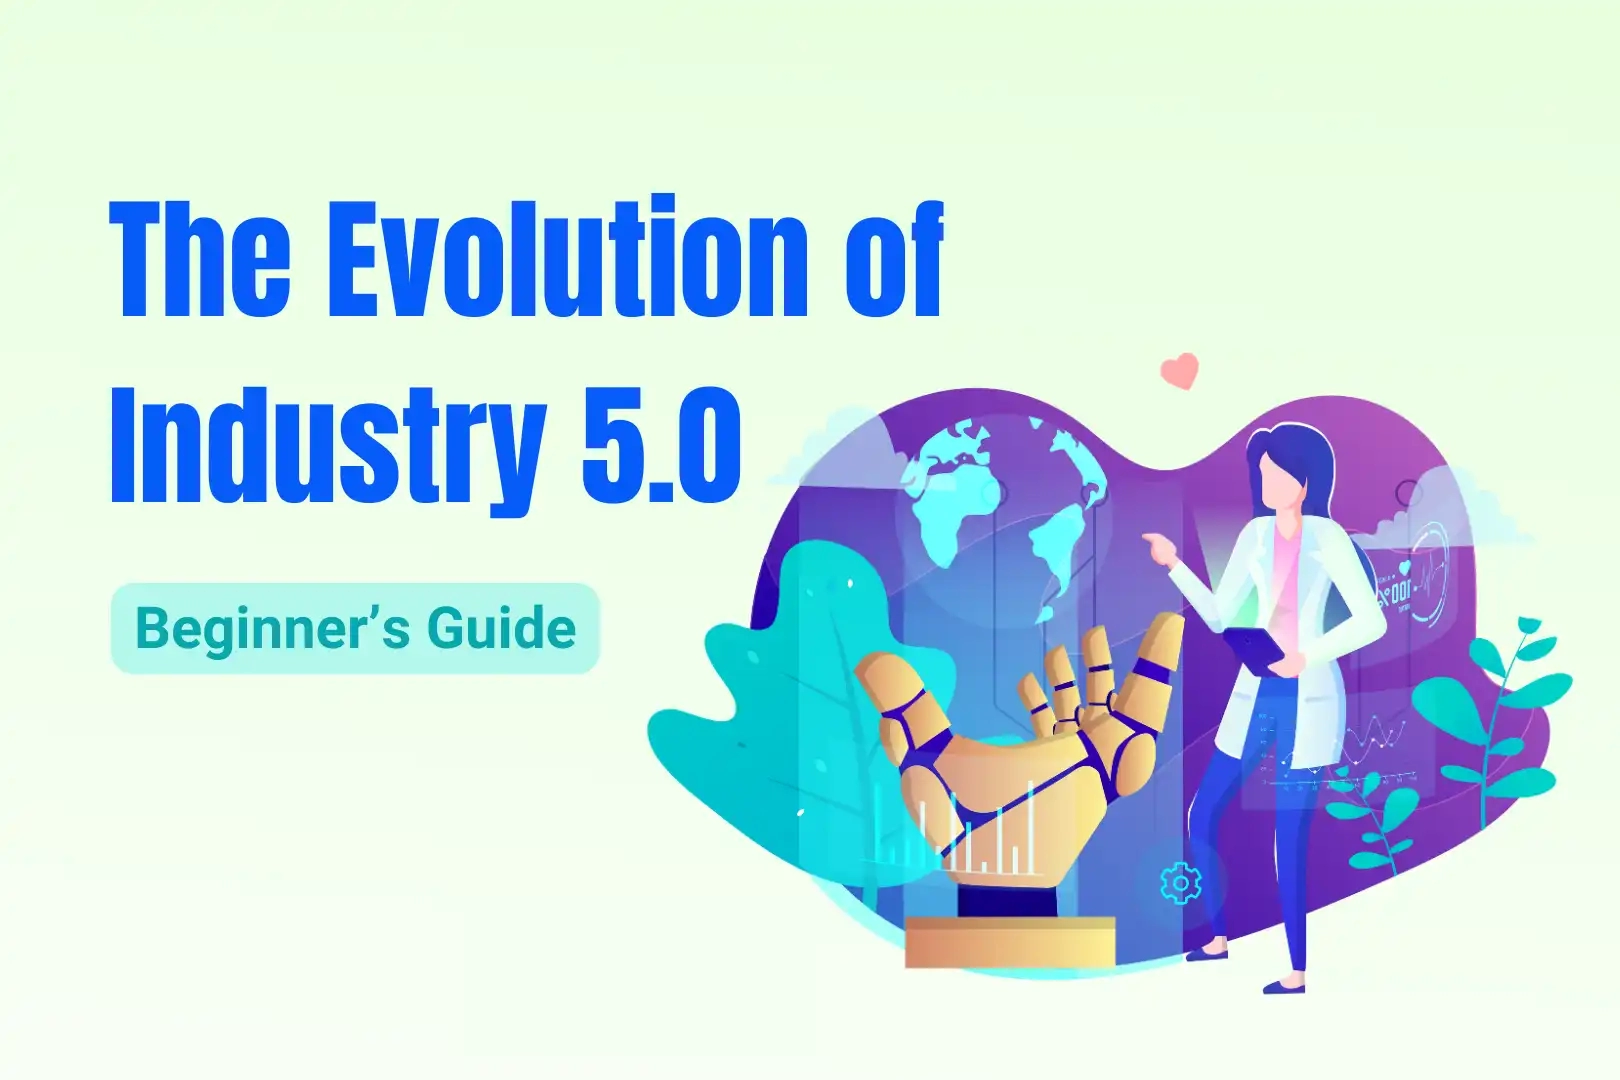 The Evolution of Industry 5.0: A Beginner's Guide